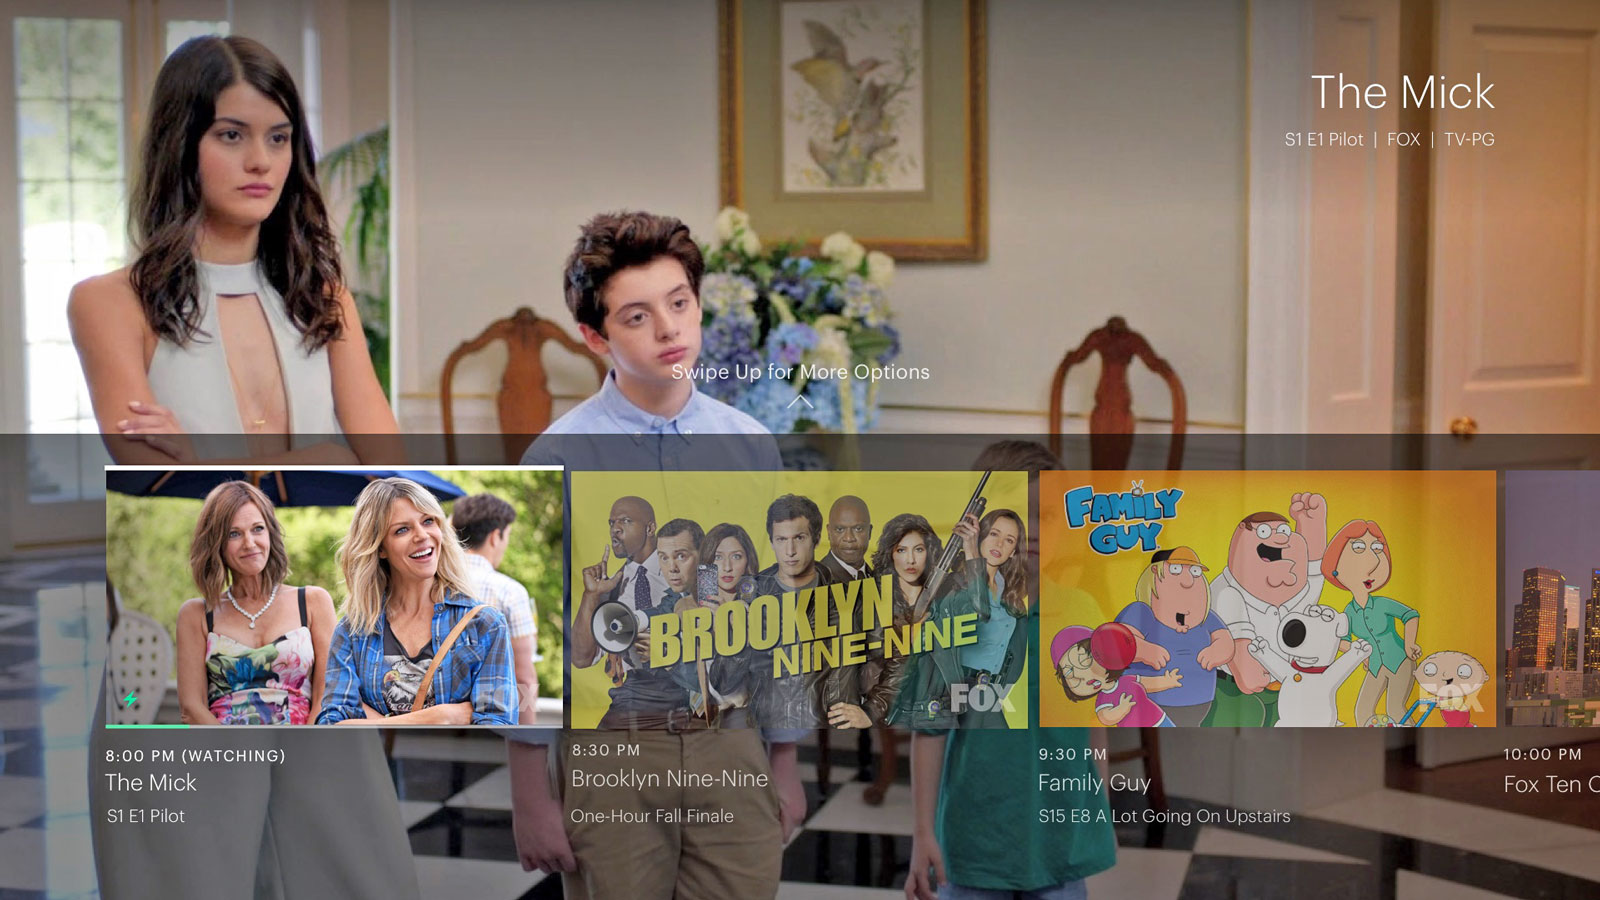 Not All of Hulu’s Owners Have Signed On to Their New Live TV Service